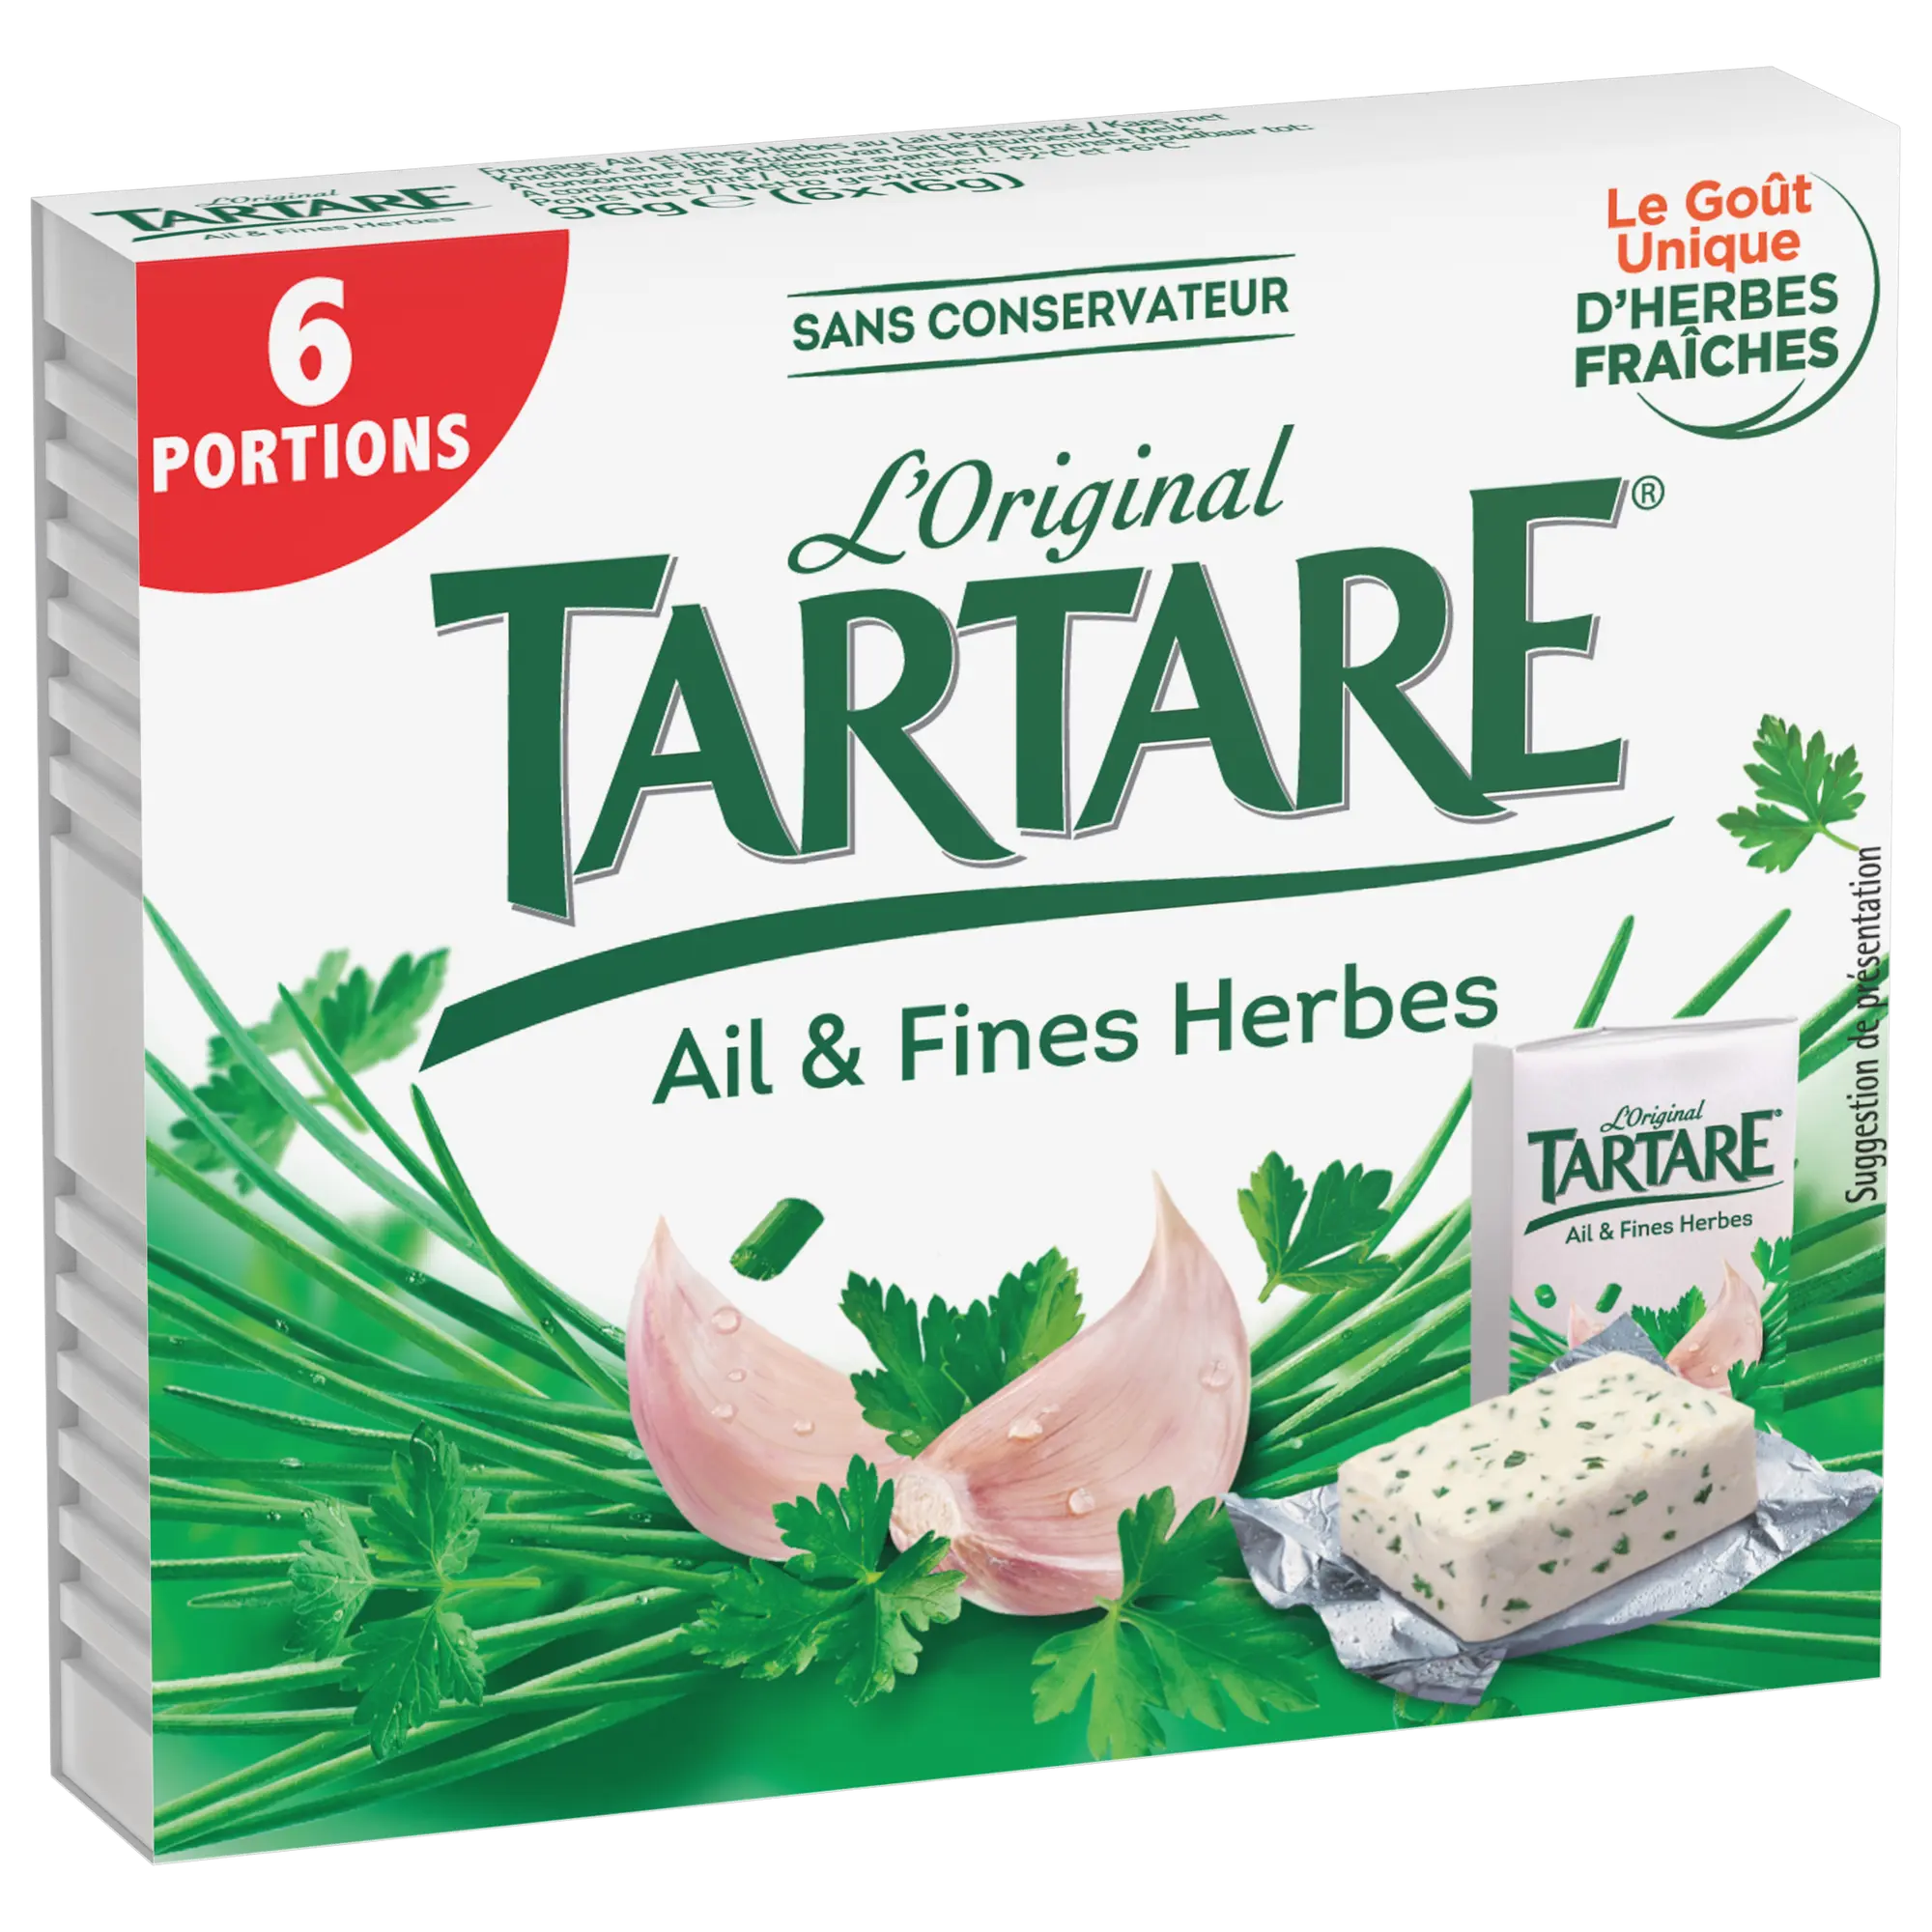 TARTARE® AIL & FINES HERBES 6 PORTIONS 96G